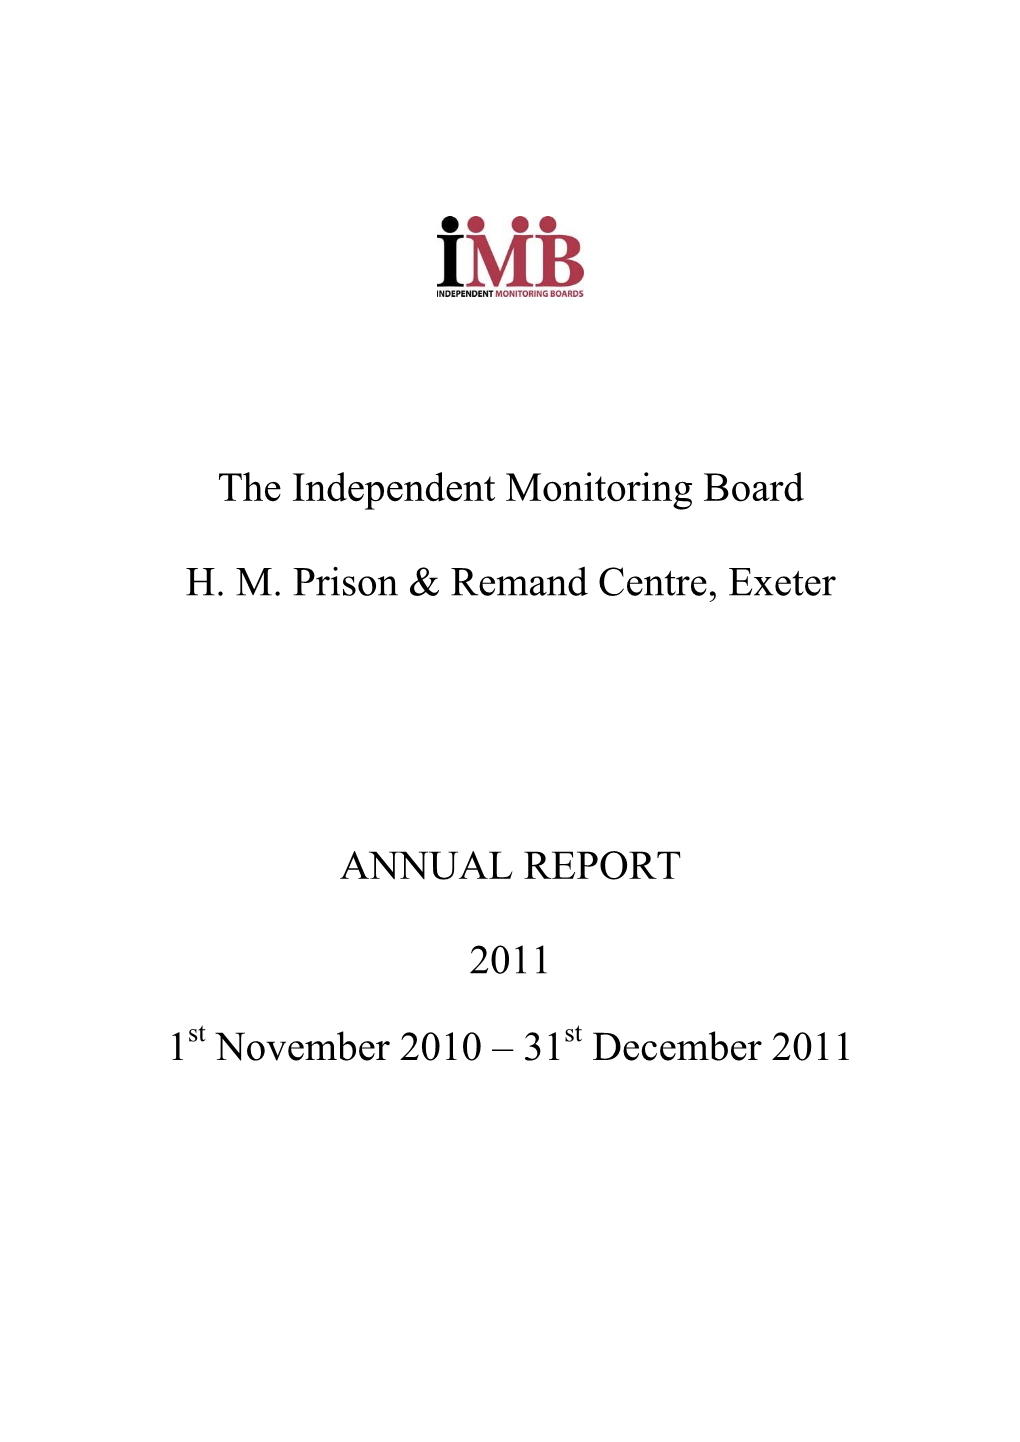 Annual Report for HMP Exeter